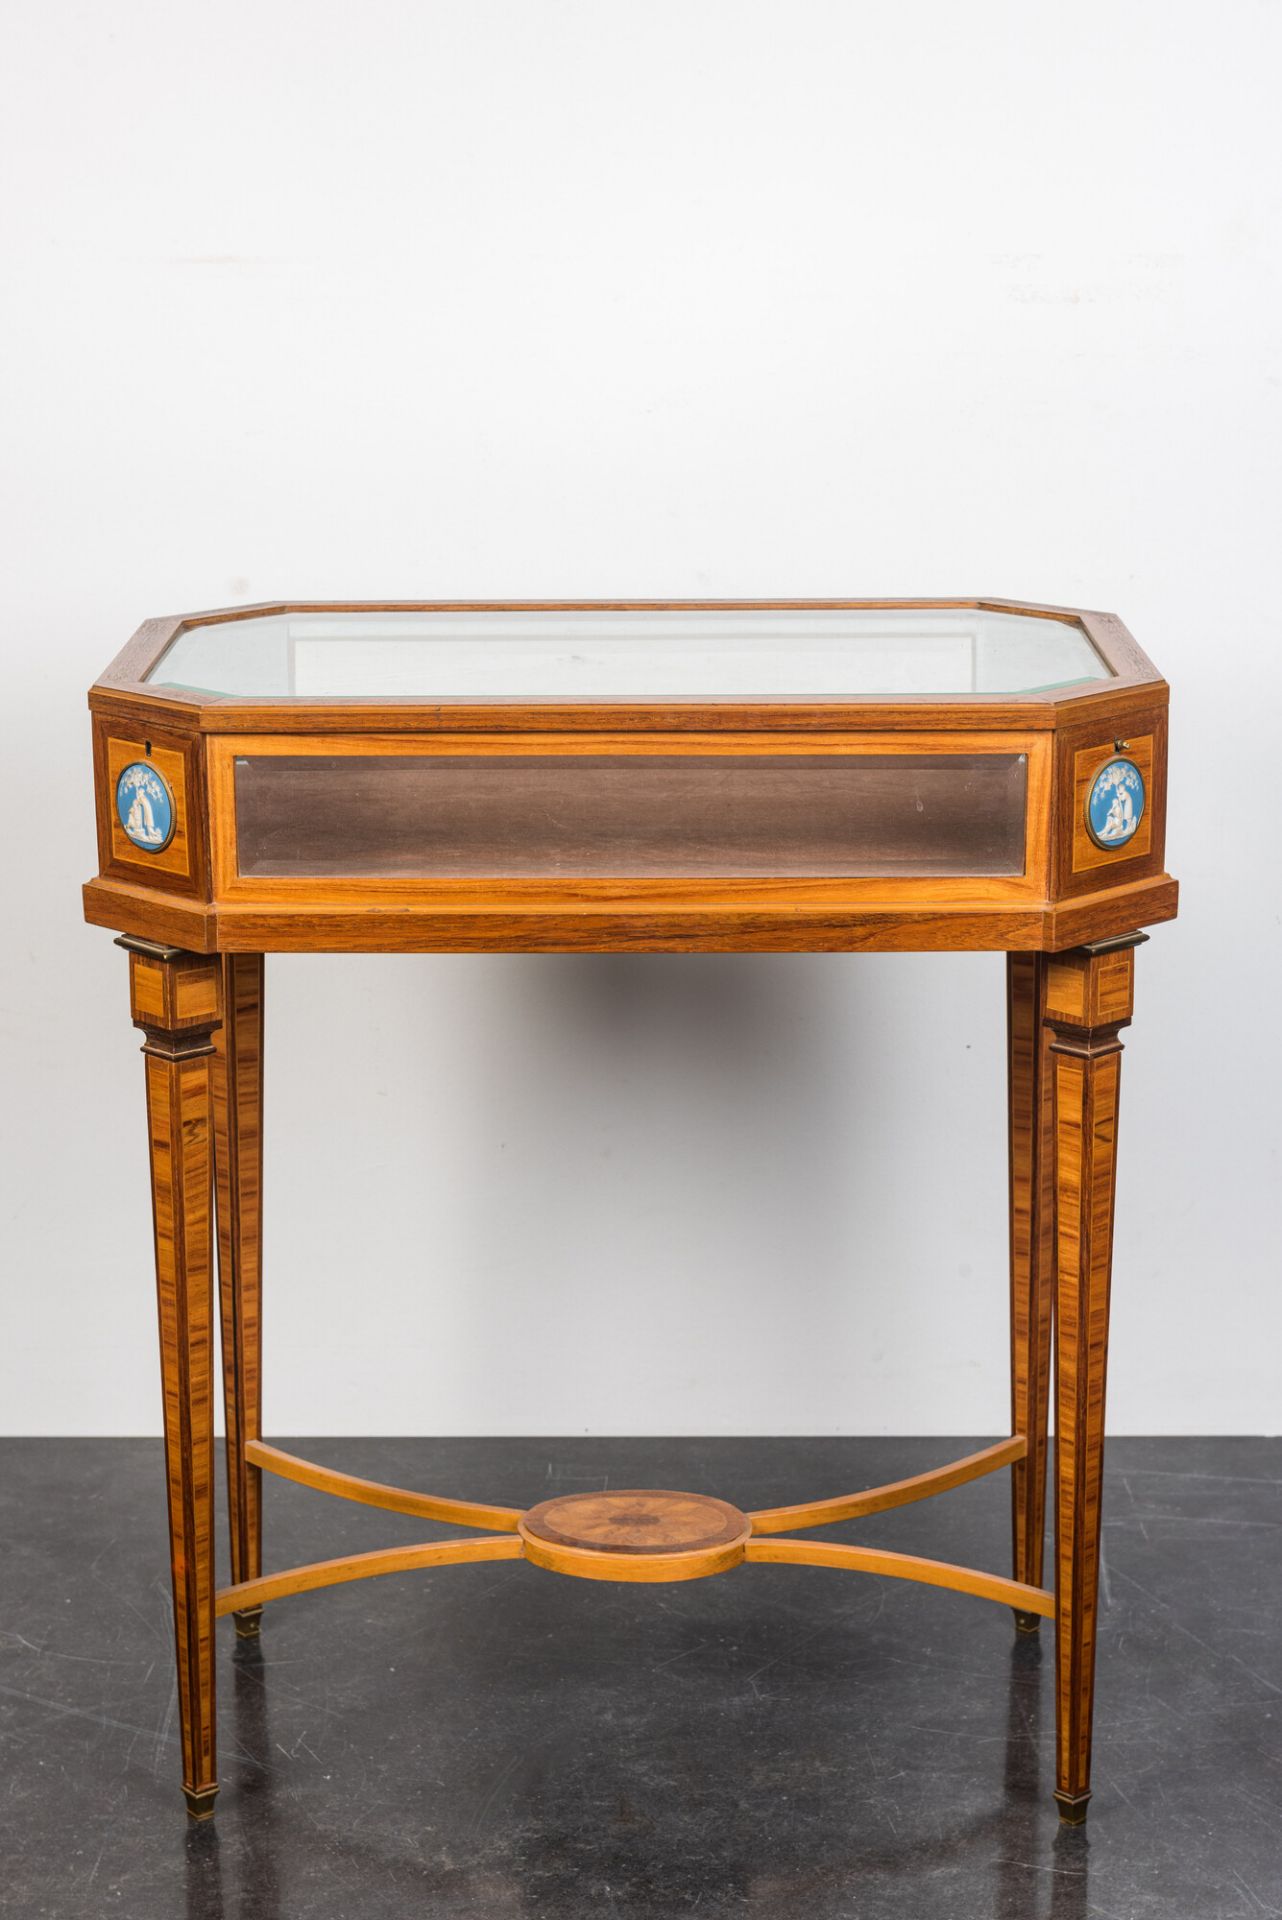 A French marquetry table display mounted with Wedgwood plaques, 2nd half 19th C. - Bild 2 aus 4